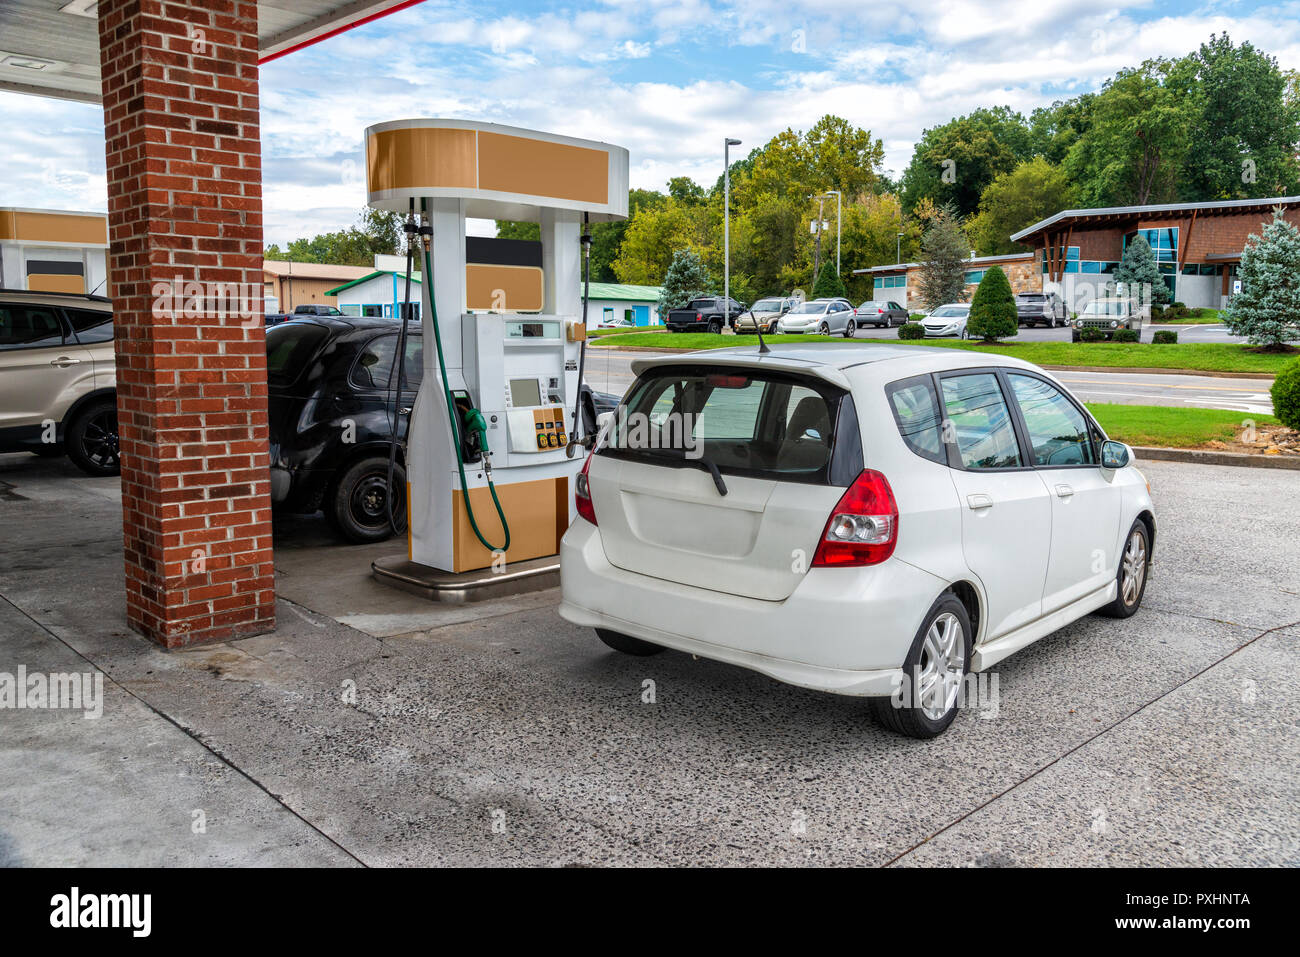 Horizontal shot of a Generic Compact Car Buying Gasoline At a Generic Convenience Store.  All visible markings and signs have been removed. Stock Photo